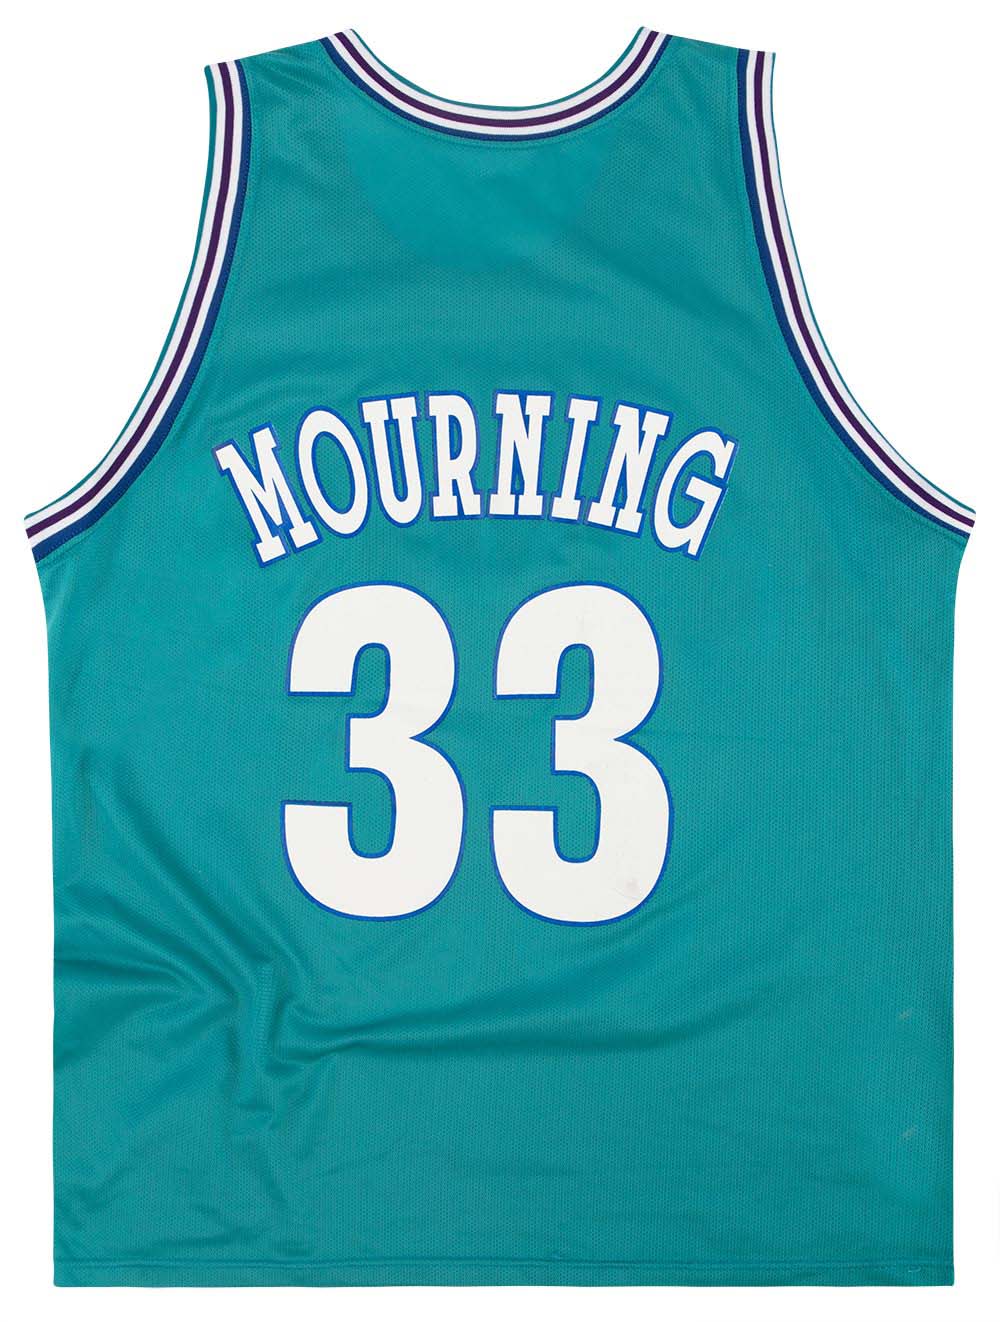 1992-95 CHARLOTTE HORNETS MOURNING #33 CHAMPION JERSEY (AWAY) XL